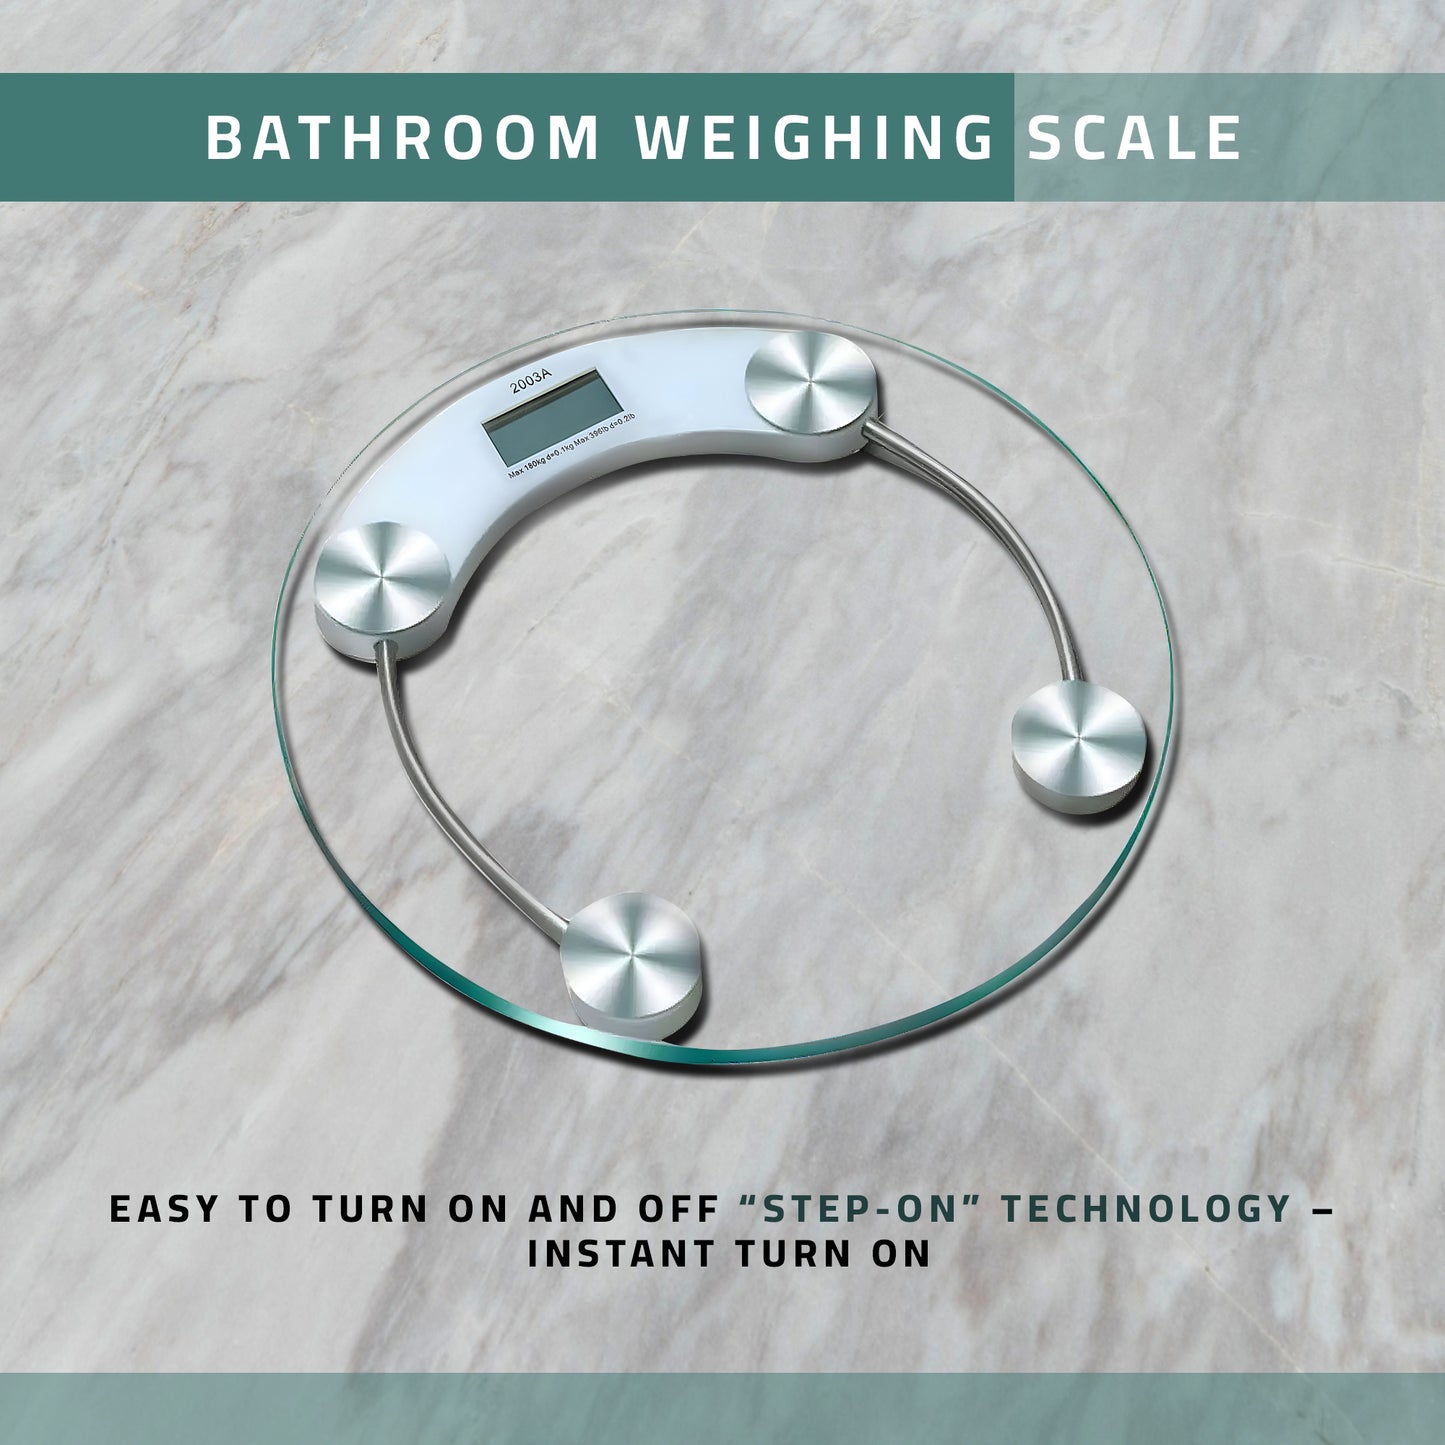 Digital Body Weight Measurement Technology Display Scale ~3611